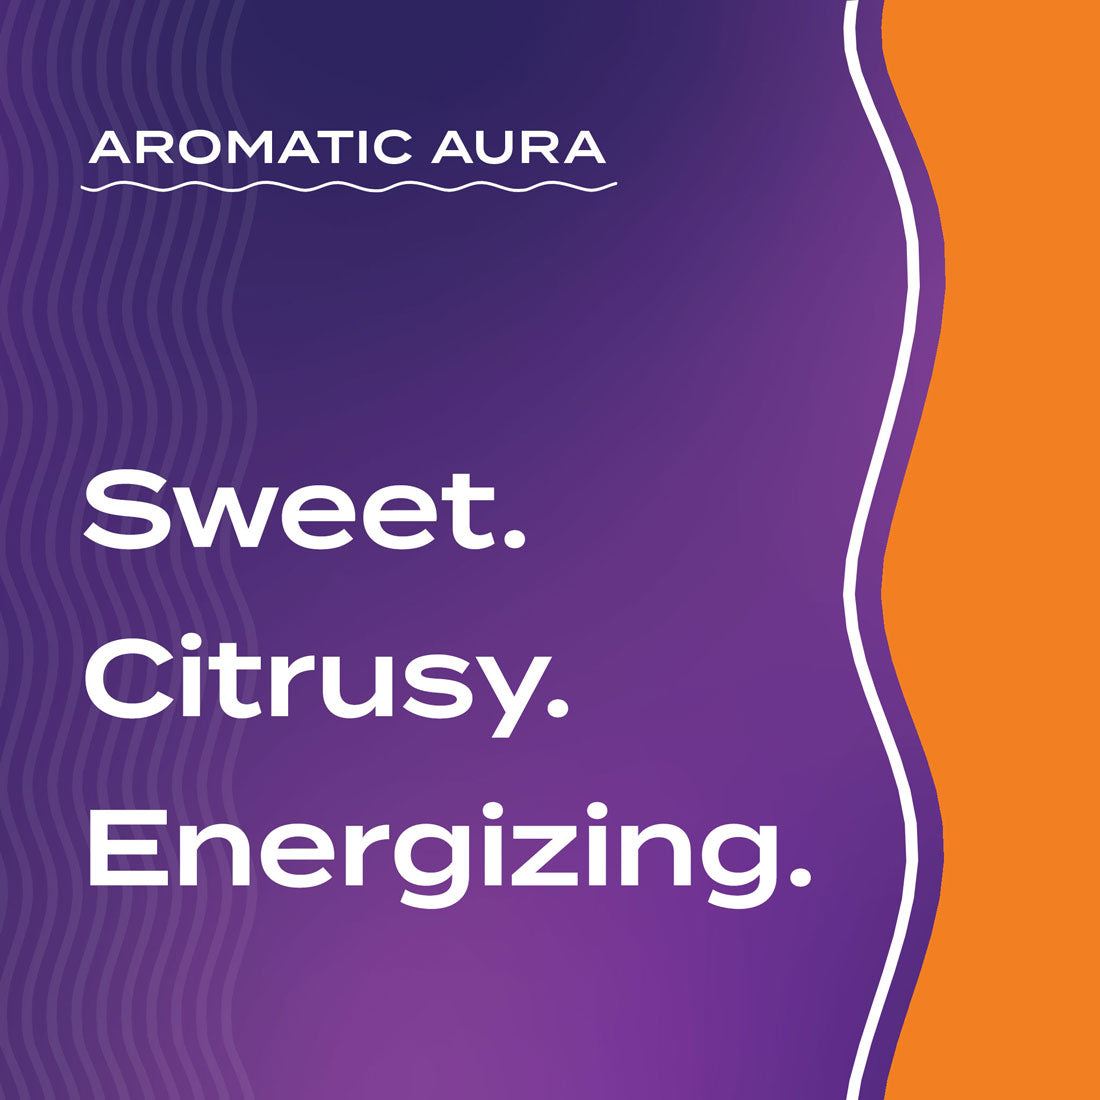 Text graphic depicting the aromatic aroma of Sweet Orange: sweet, citrusy, and energizing.